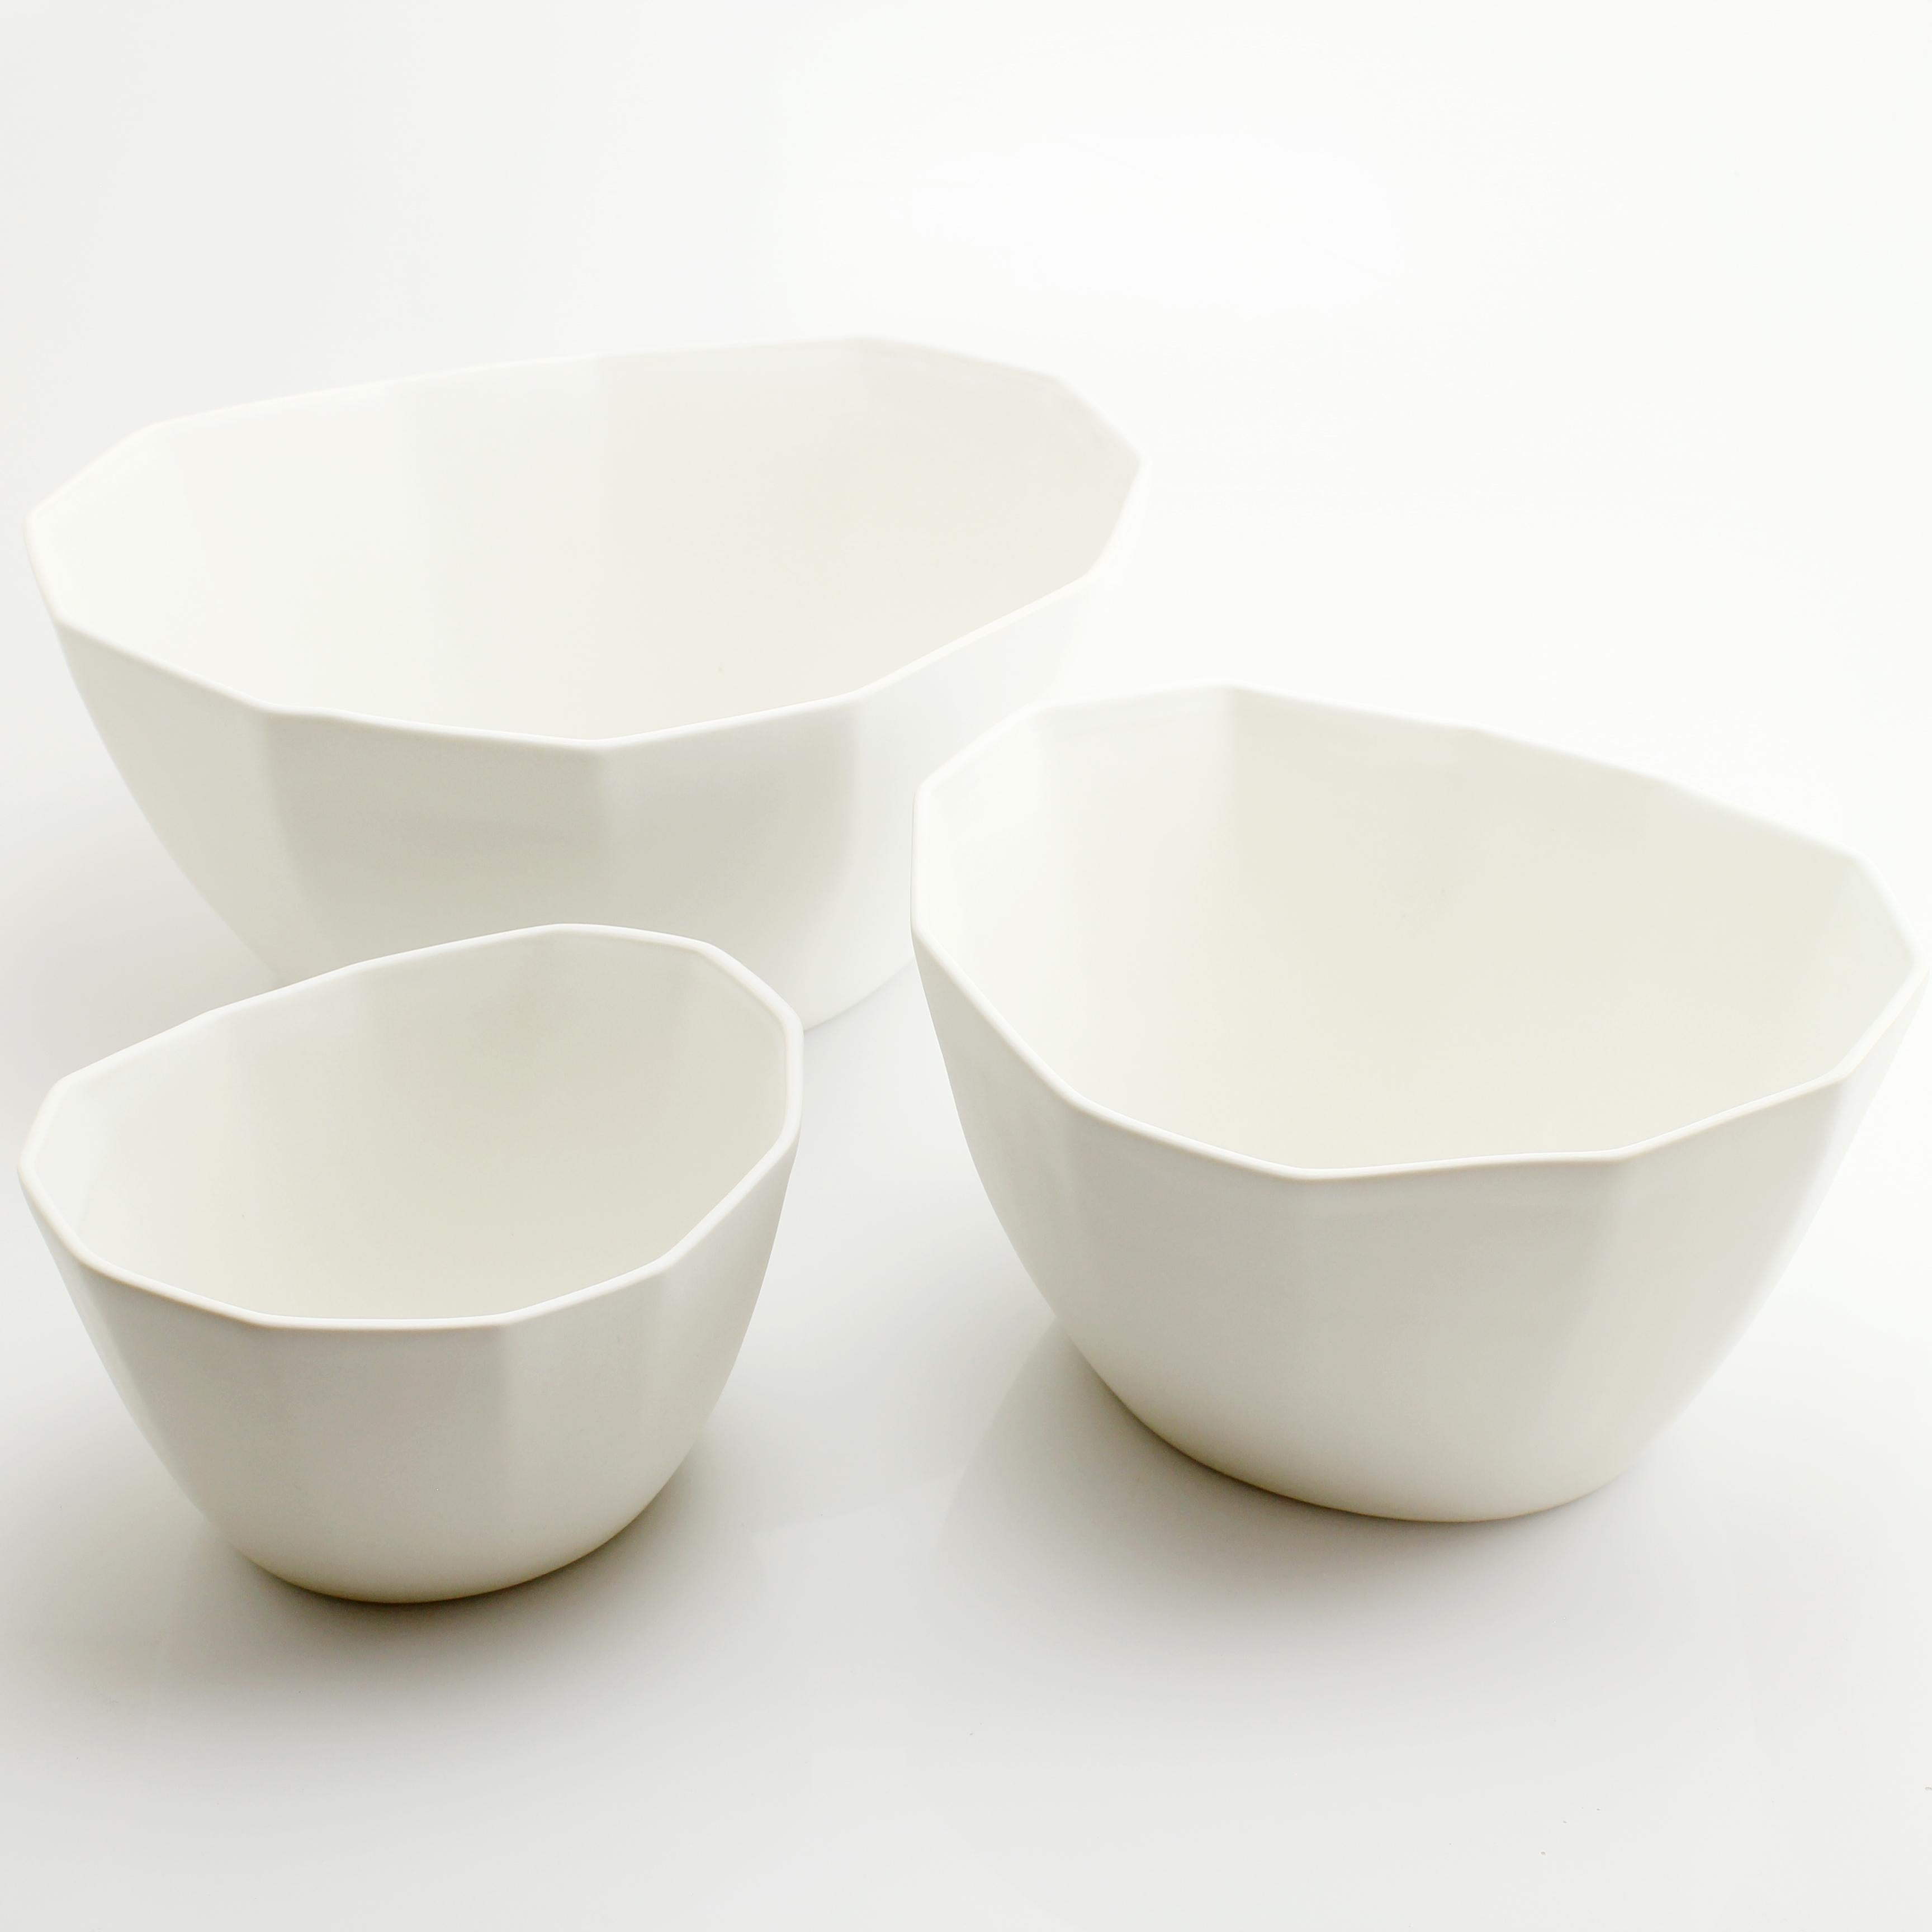 Nesting bowls are a kitchen staple that find purpose in any home. These delightful oval space-savers can serve as an array of serving bowls that you can neatly store in your cabinet, or disperse them around your space to create a unifying and